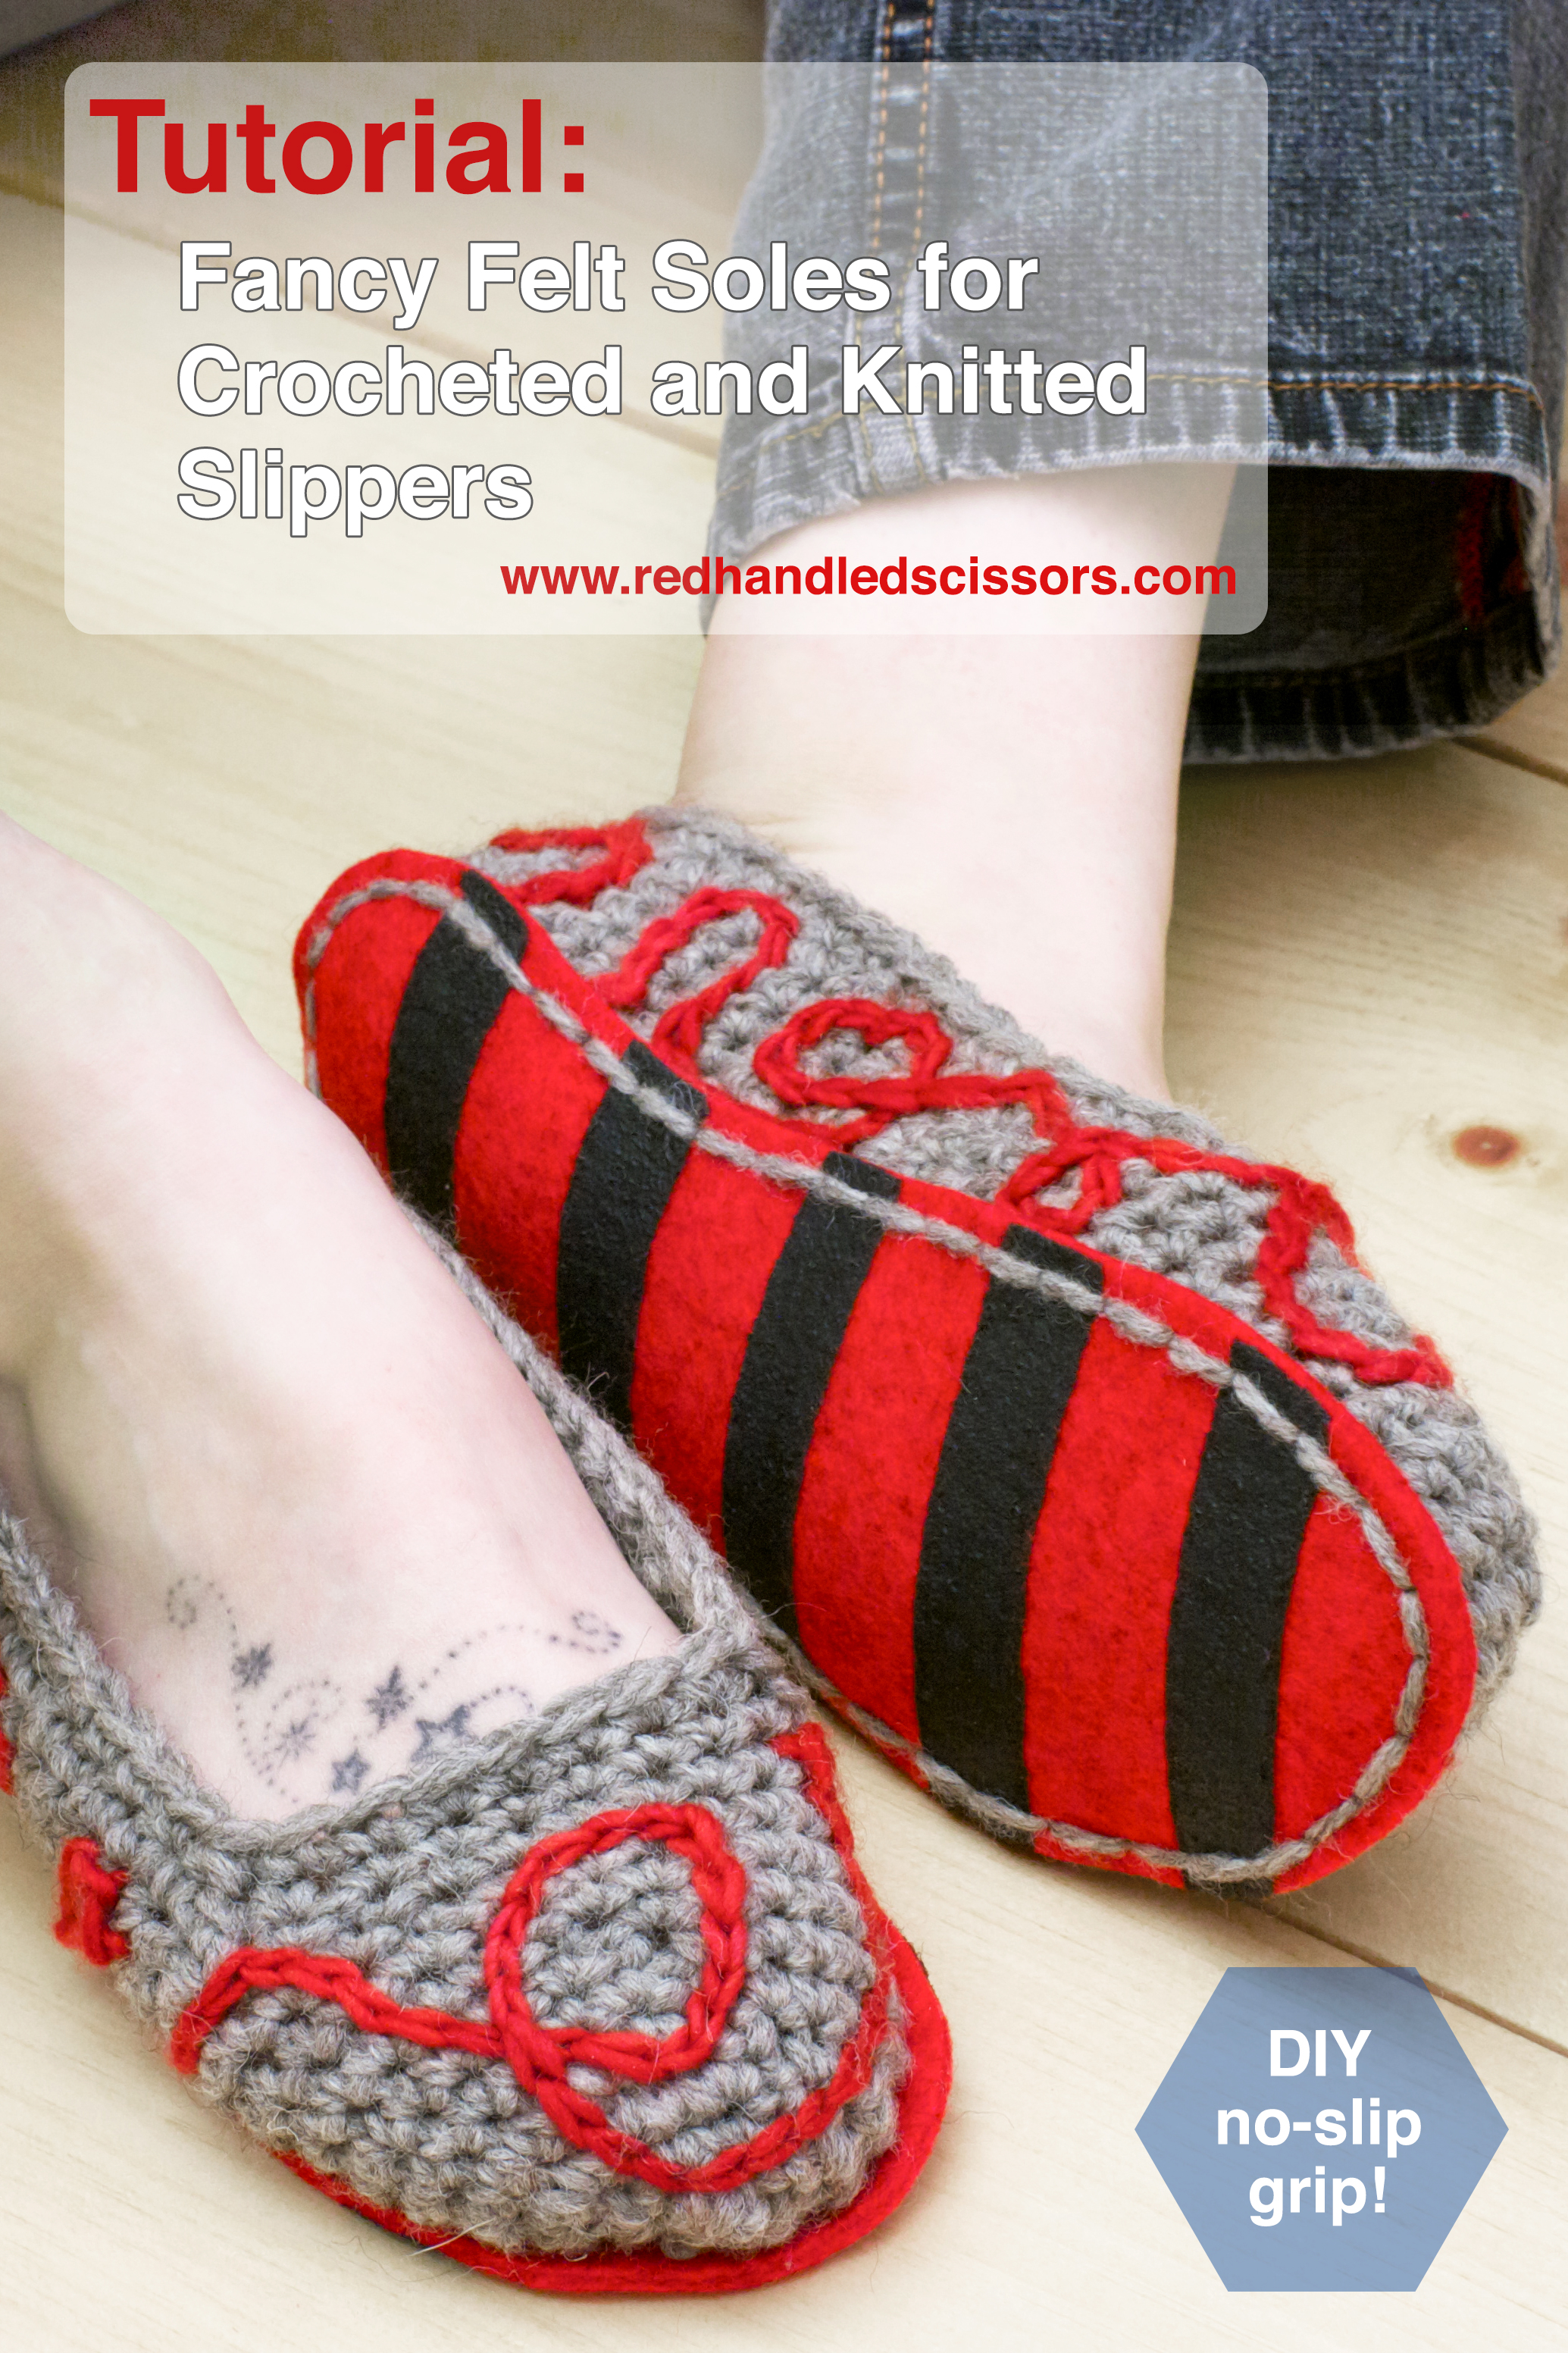 sew on soles for knitted slippers